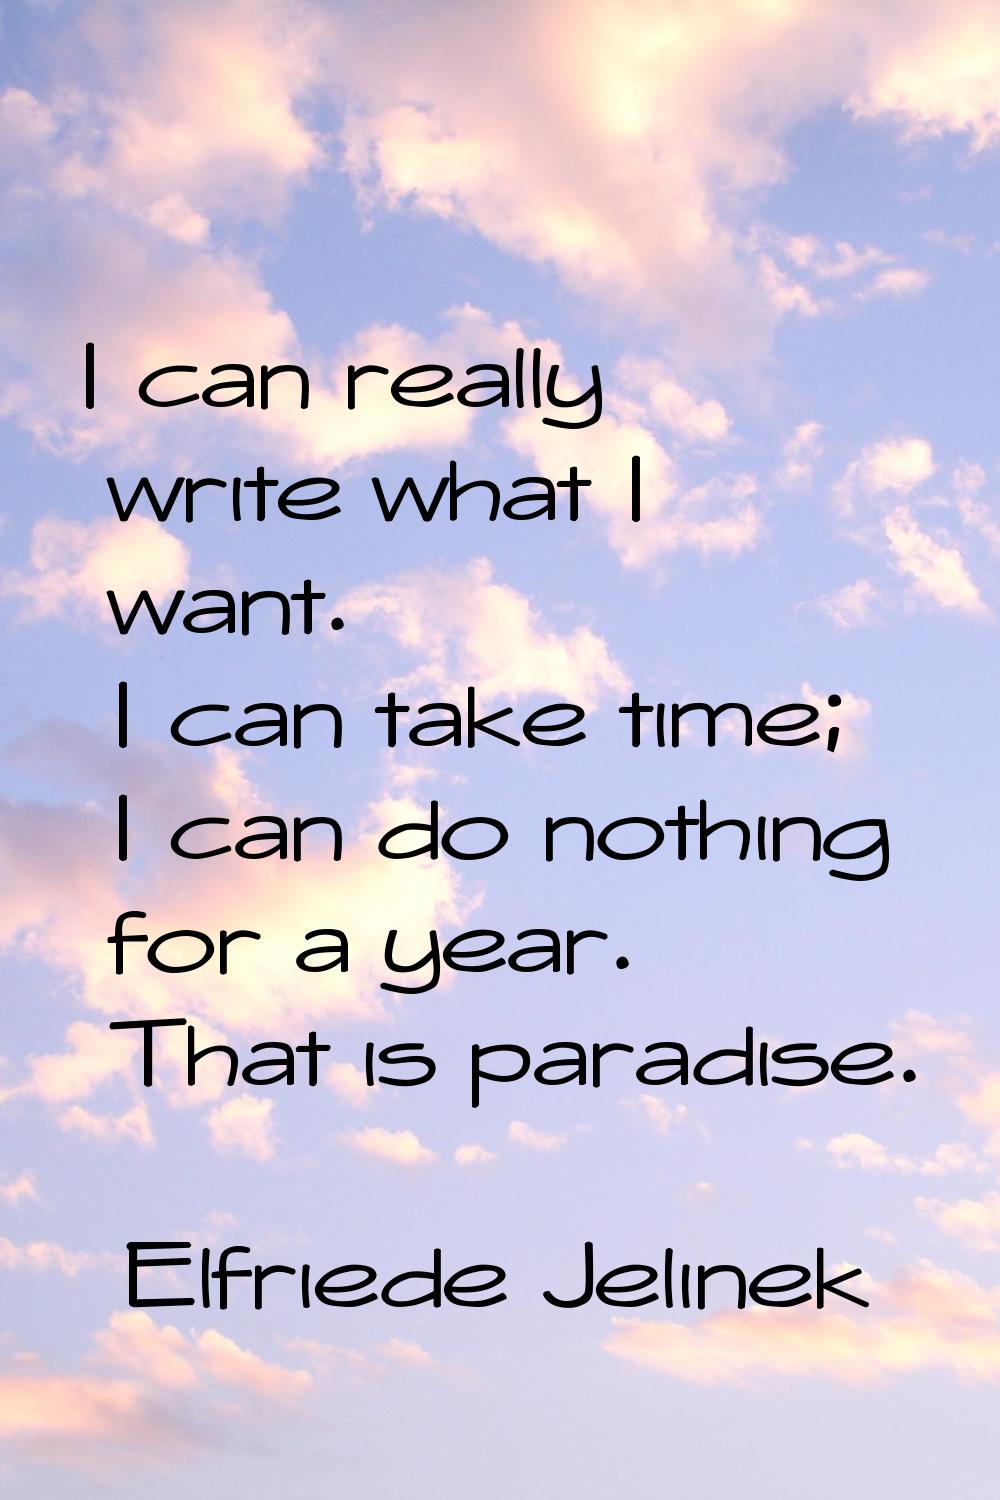 I can really write what I want. I can take time; I can do nothing for a year. That is paradise.